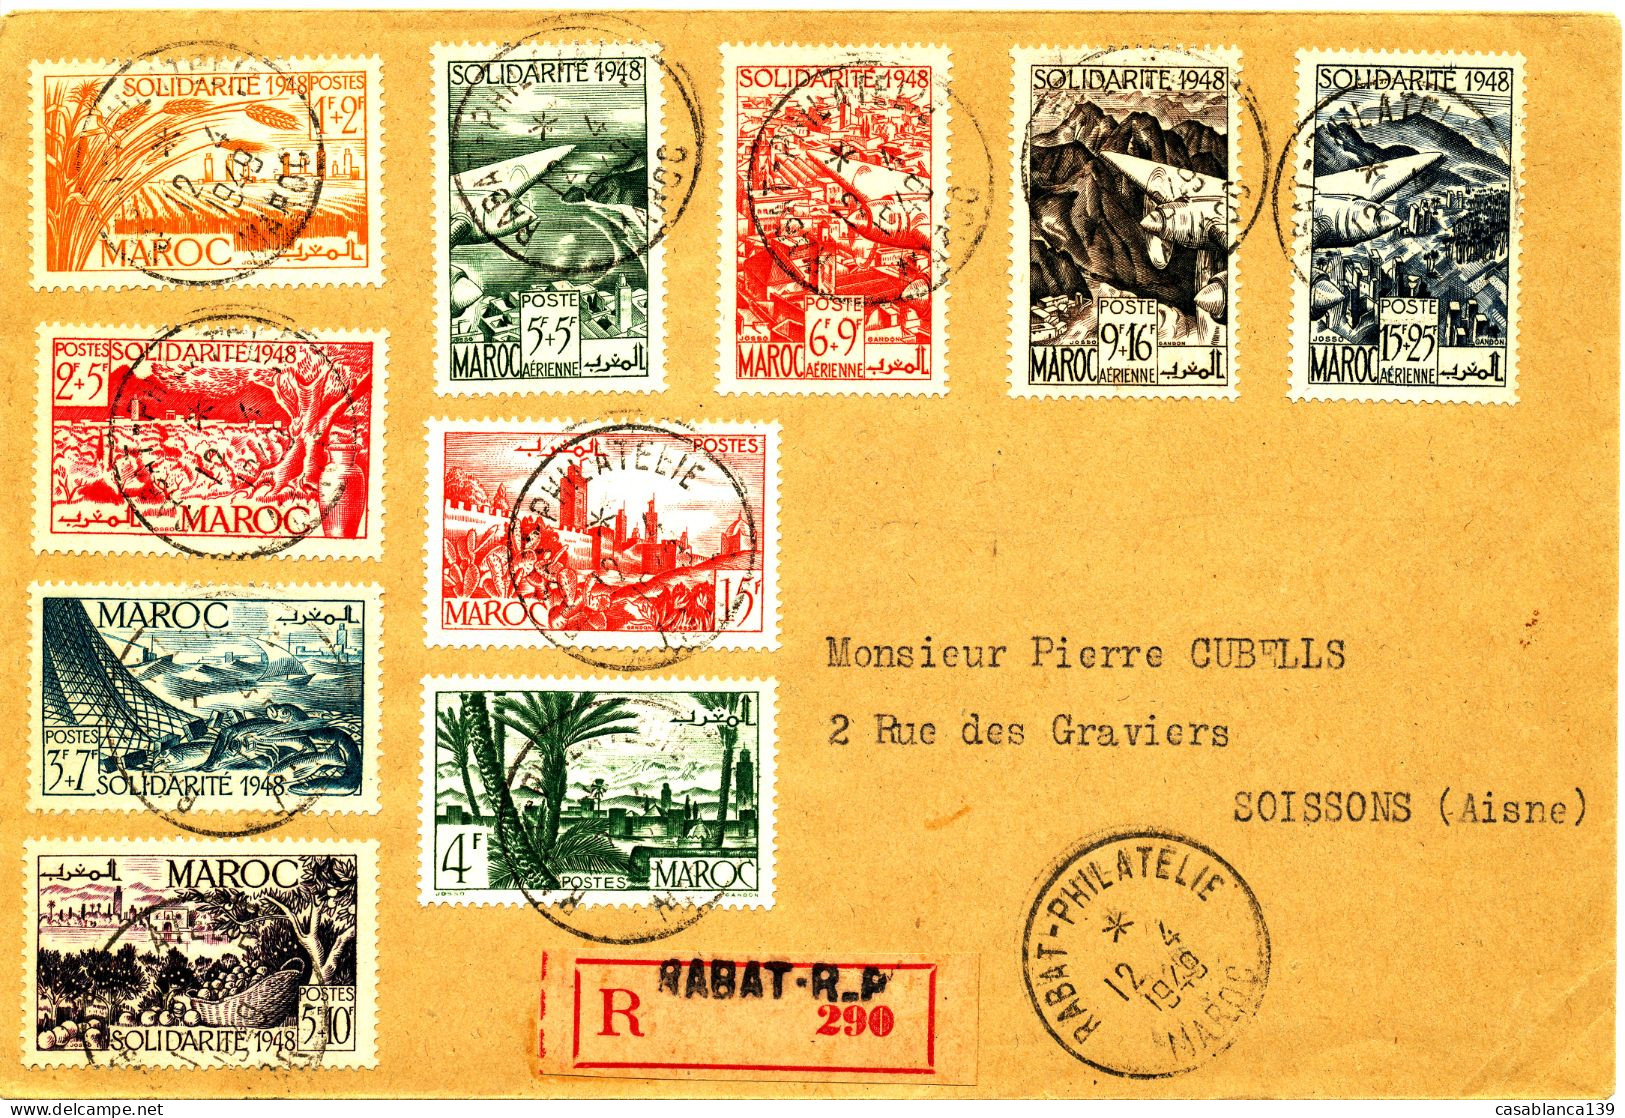 Morocco 1948 Complete Set Of Solidarity 1948 Mi 283-290 Rabat To France, Very Fine Used (RARE) - Oblitérés